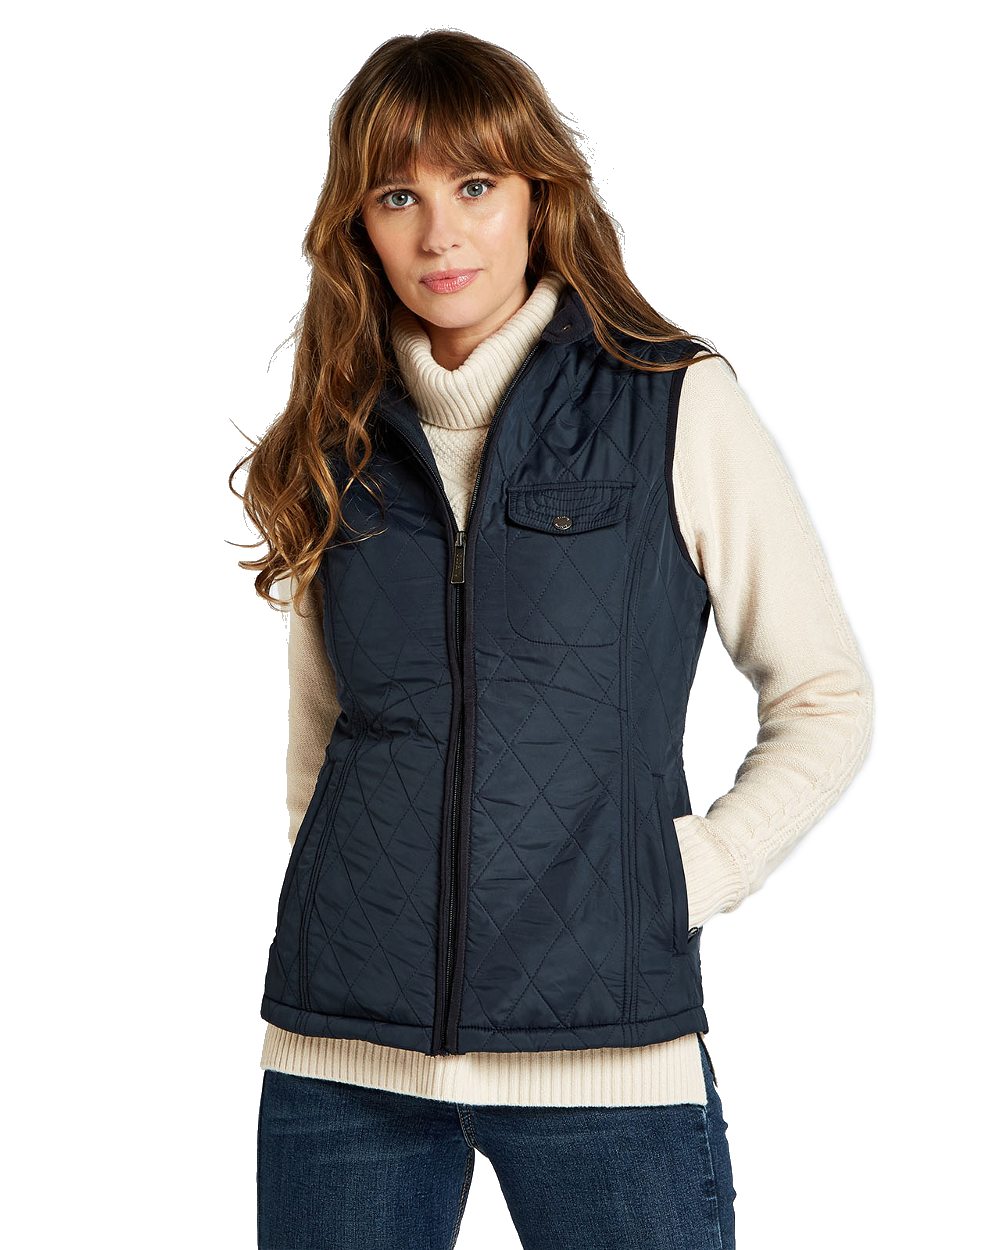 Dubarry Rathdown Quilted Gilet in Navy 